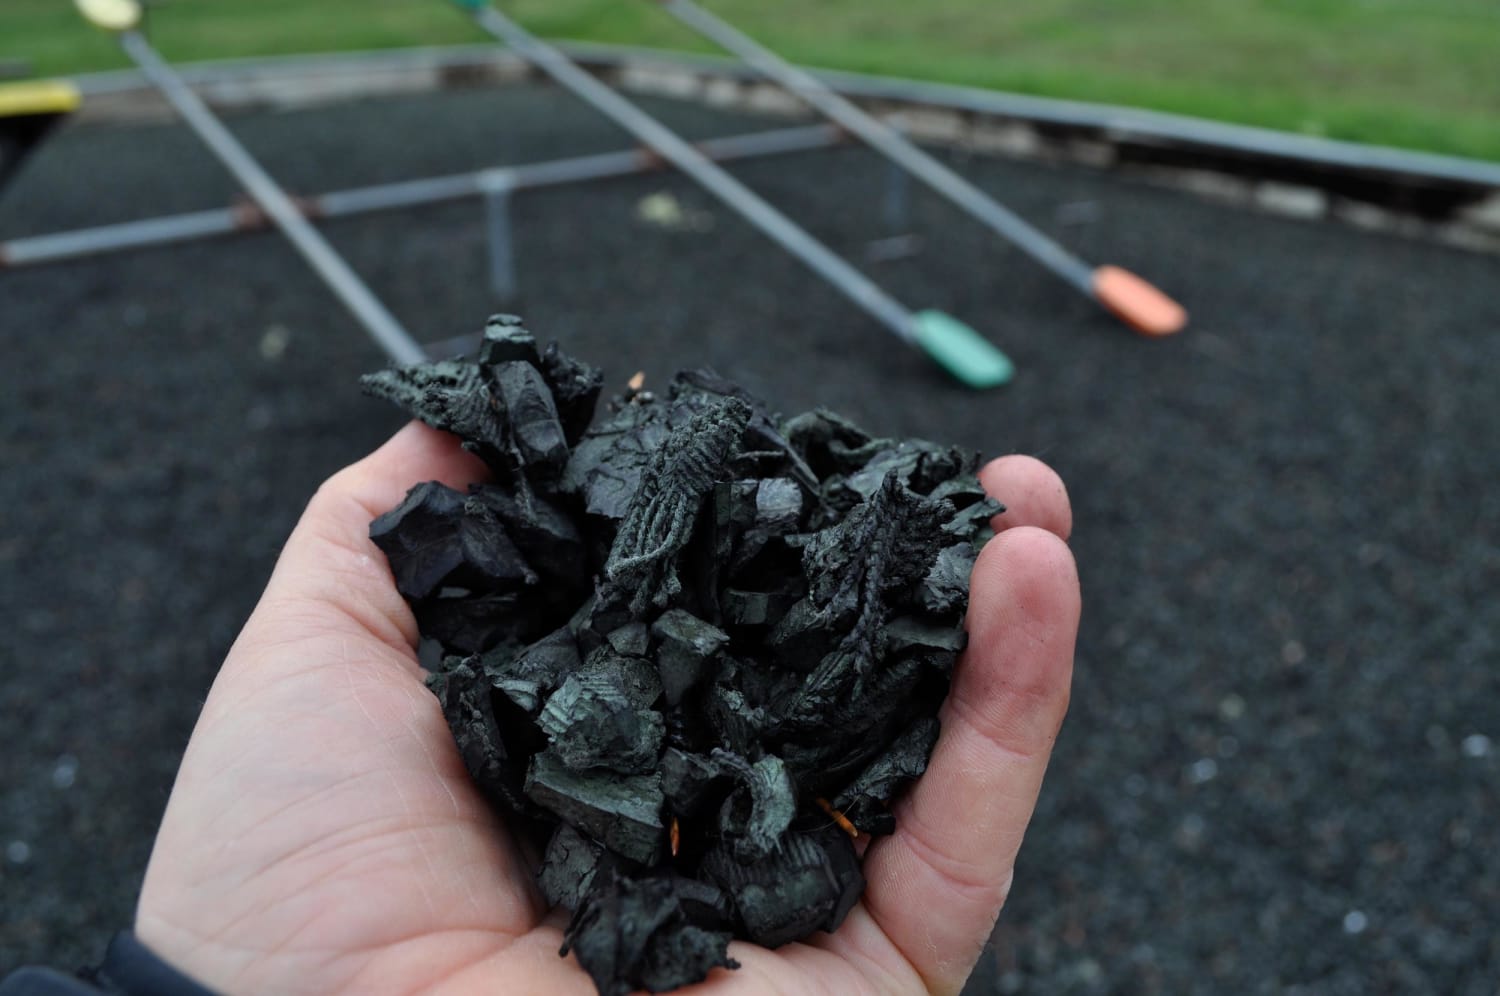 Is Rubber Mulch A Safe Surface For Your, Are Shredded Tires Safe For Playgrounds